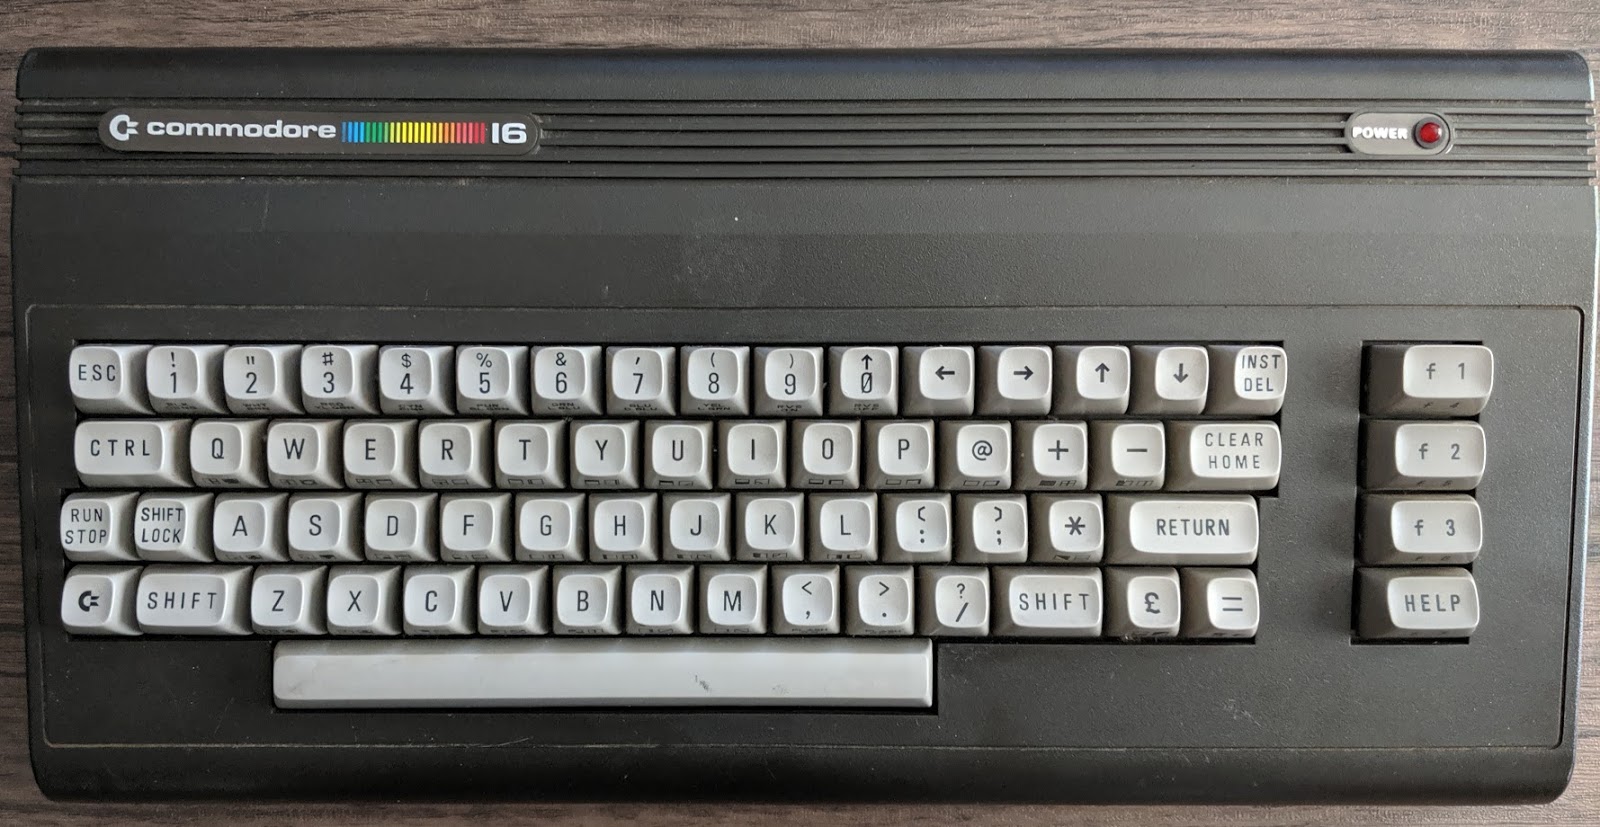 The Calculator Review: Commodore 16 Part 1: